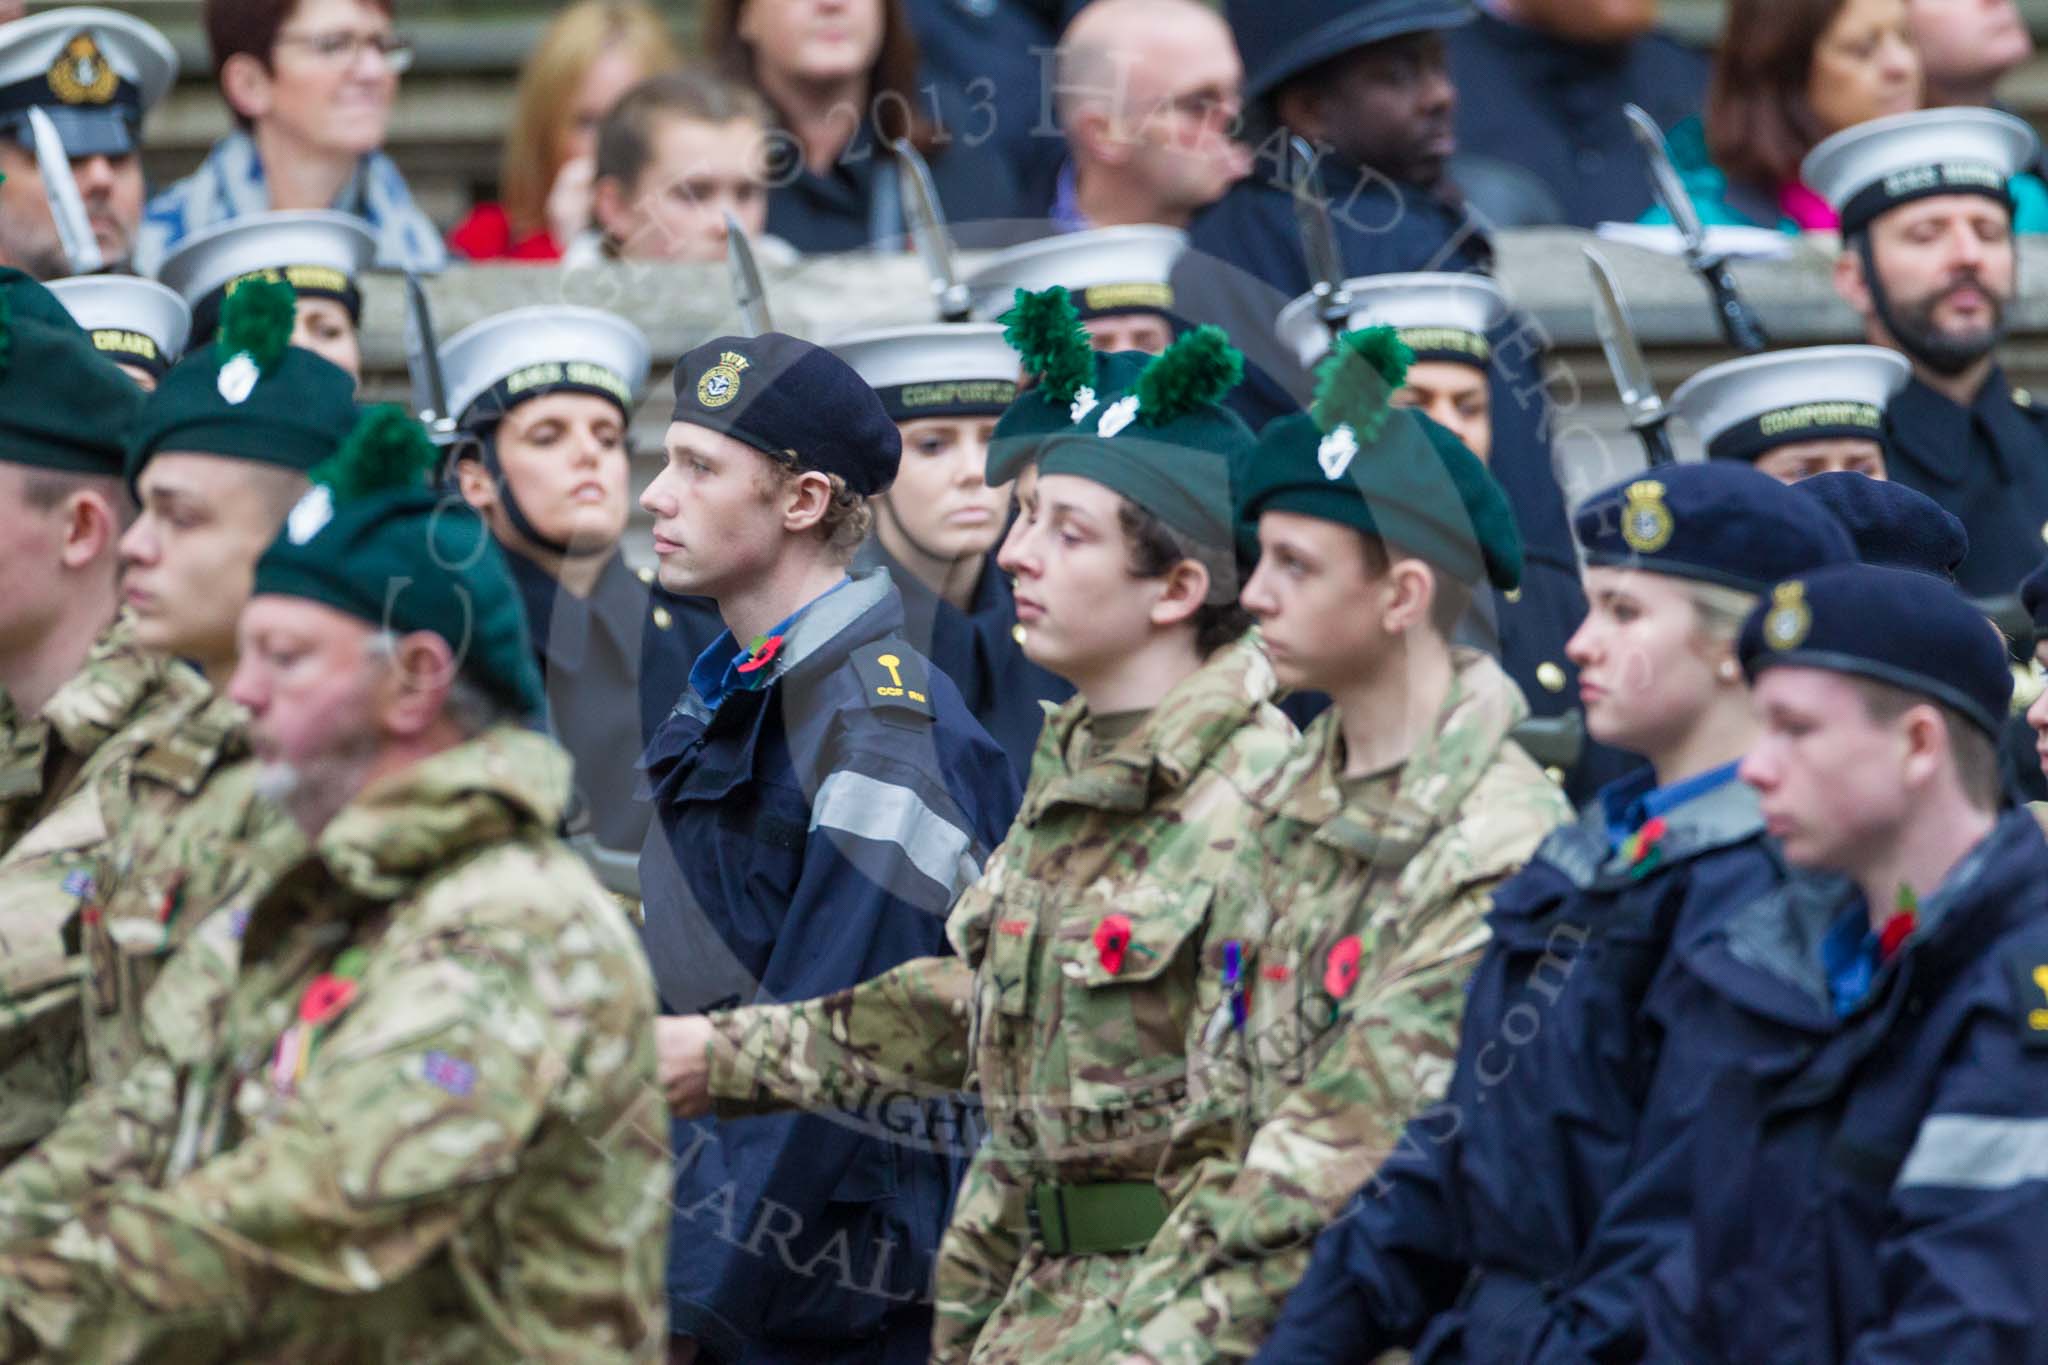 Remembrance Sunday at the Cenotaph 2015: Group M46, Sea Cadet Corps.
Cenotaph, Whitehall, London SW1,
London,
Greater London,
United Kingdom,
on 08 November 2015 at 12:20, image #1693